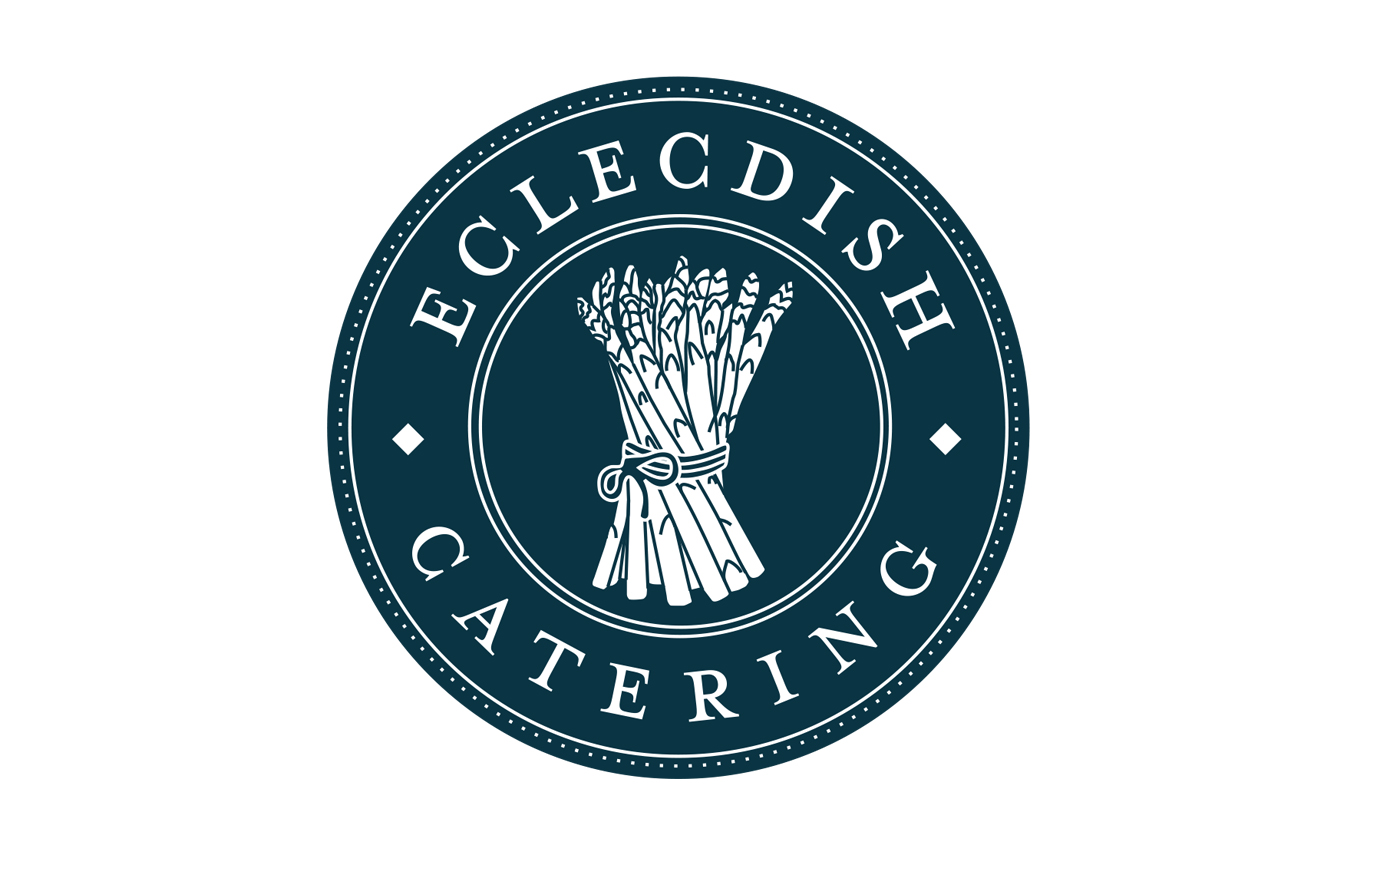 Eclecdish Catering